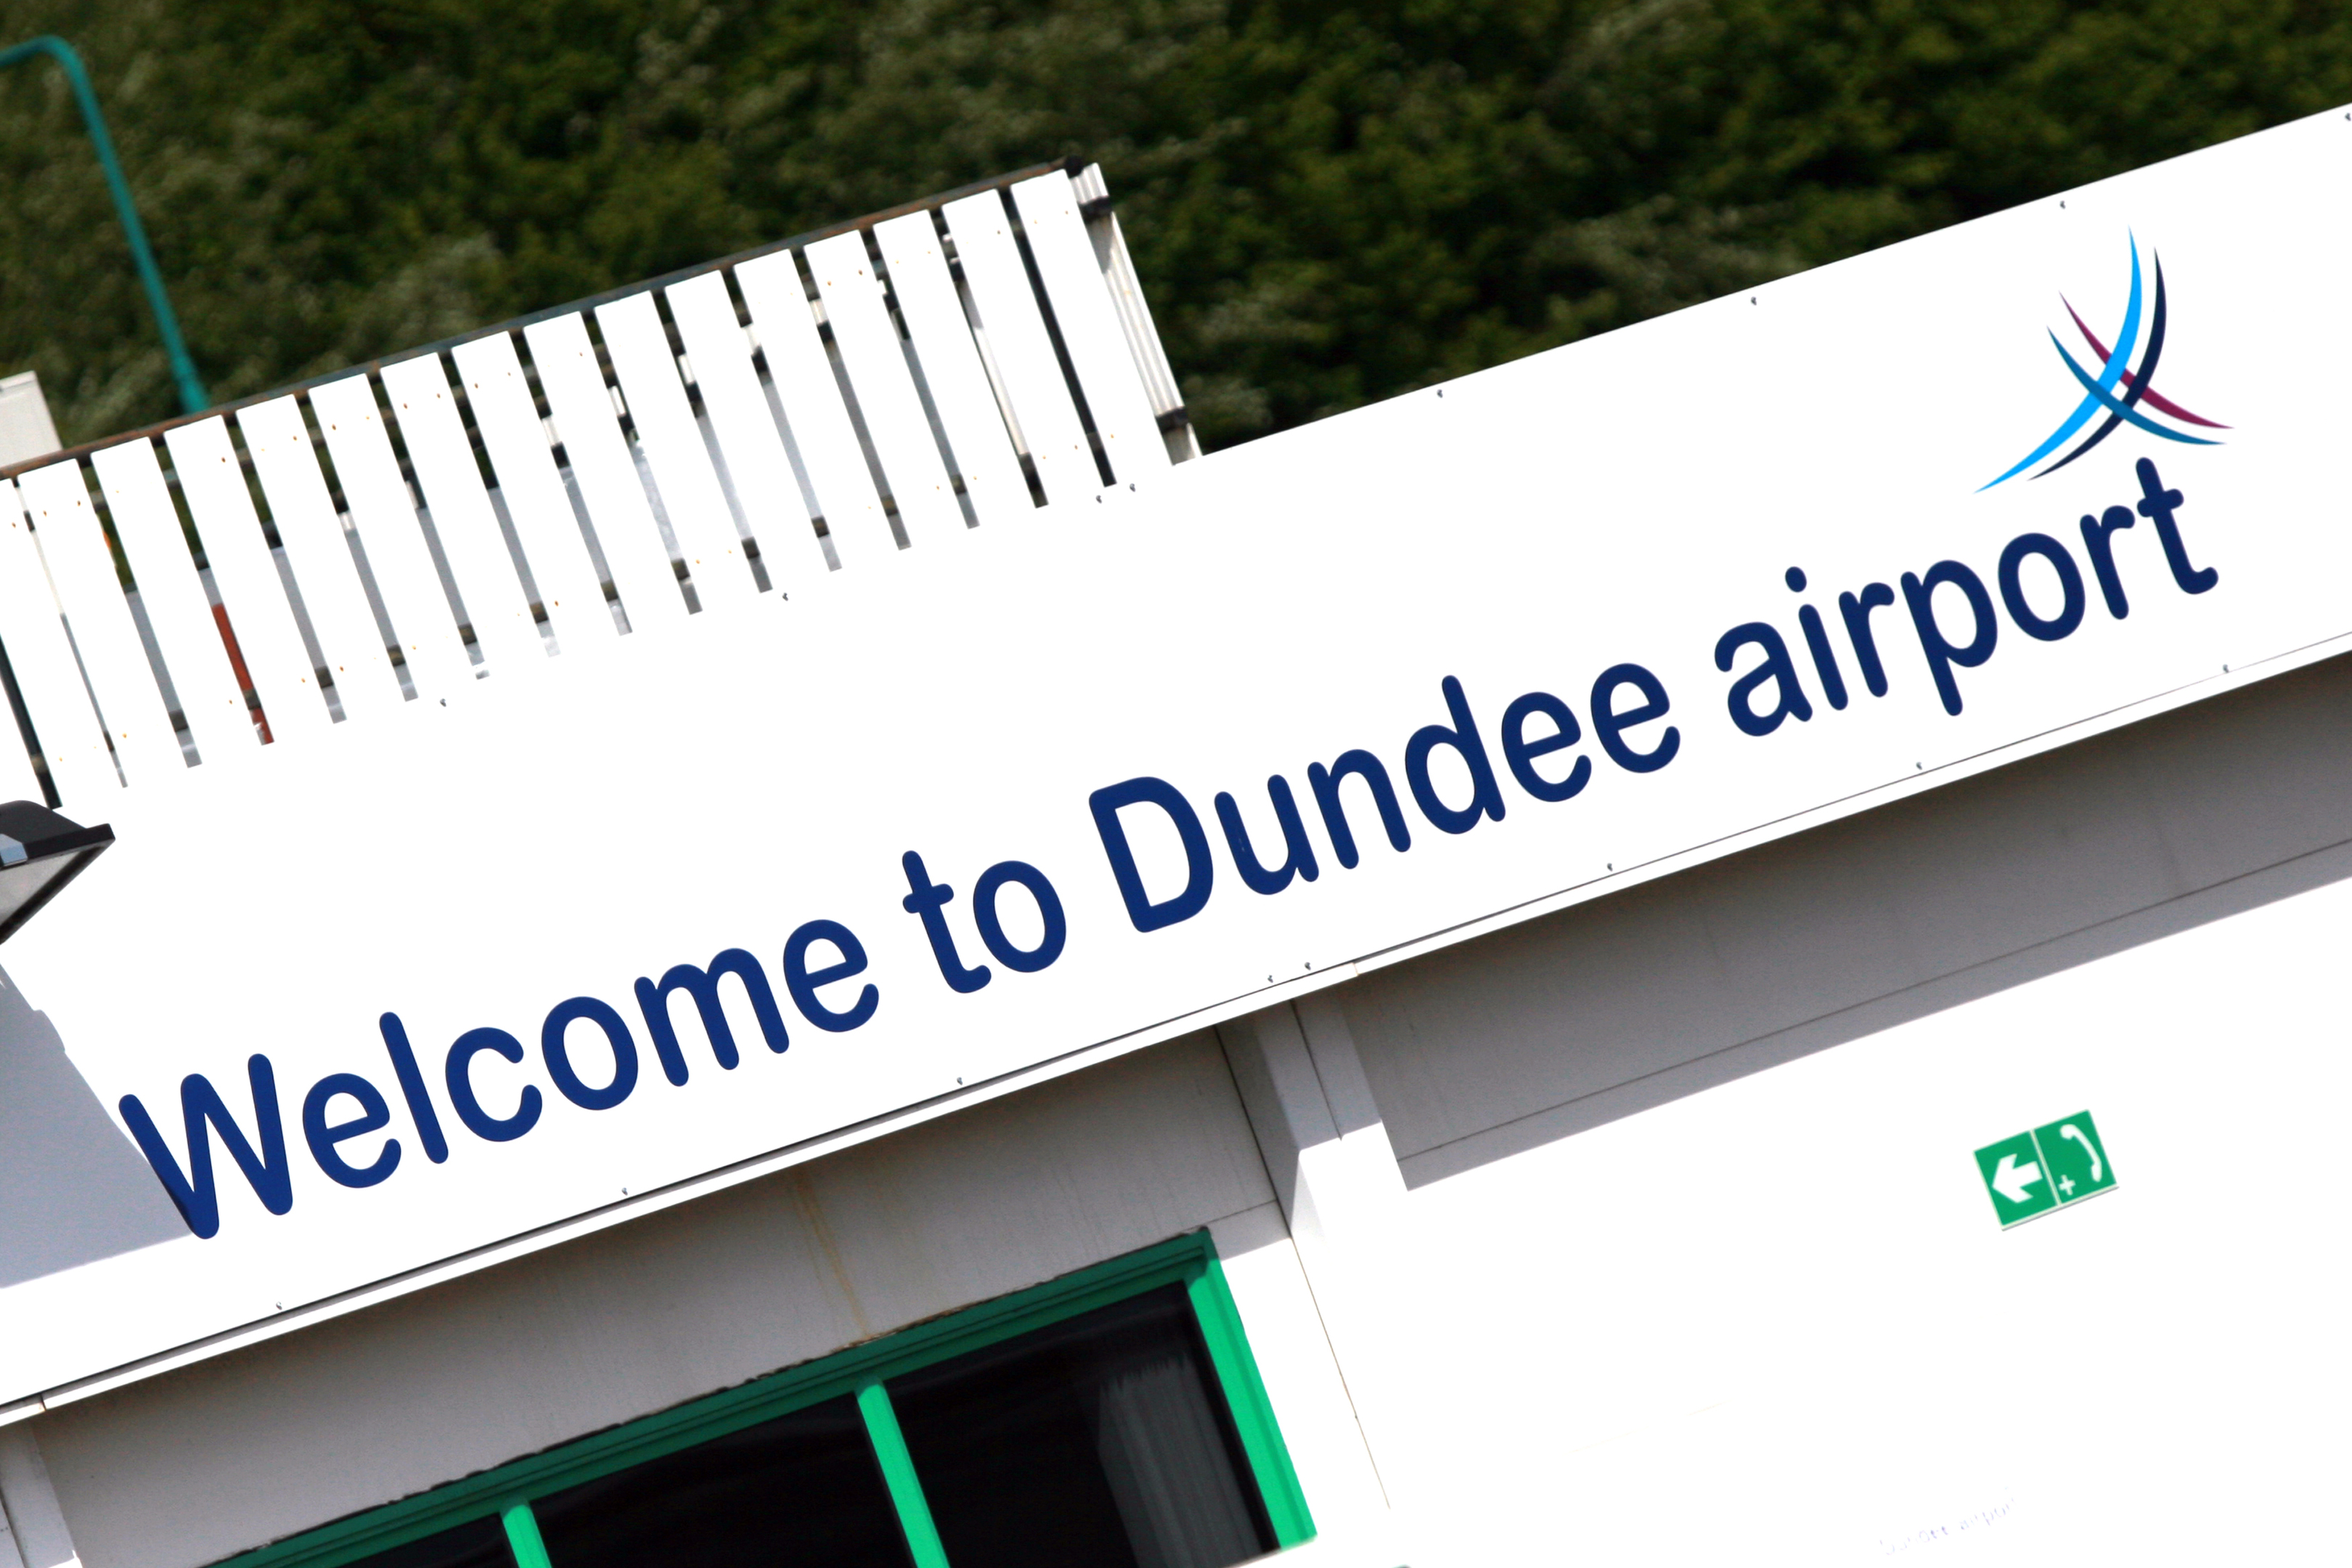 Dundee Airport